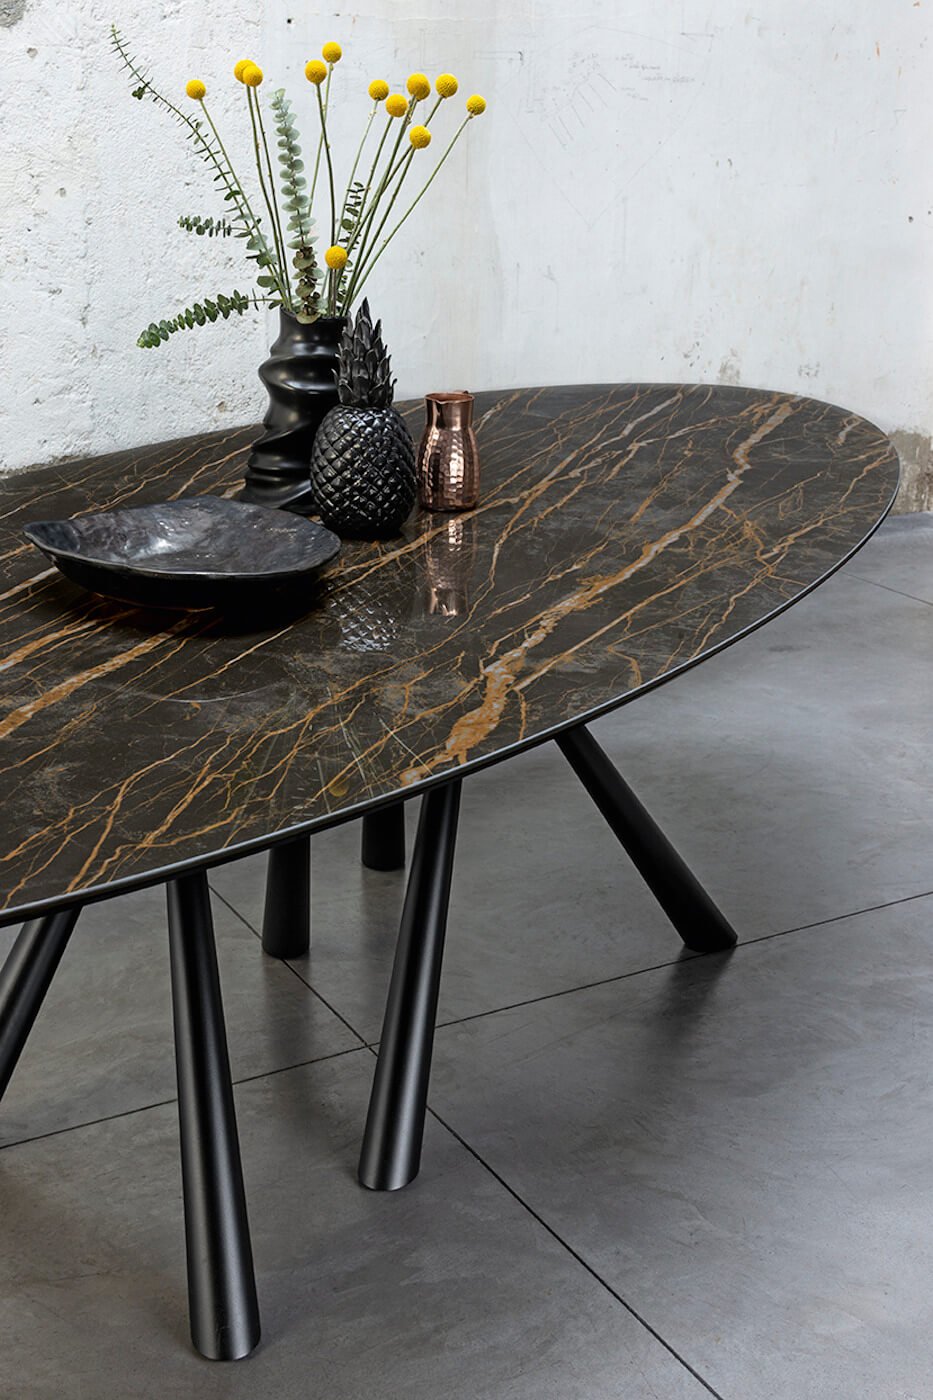 Forest Oval Dining Table from Midj, designed by Beatriz Sempere